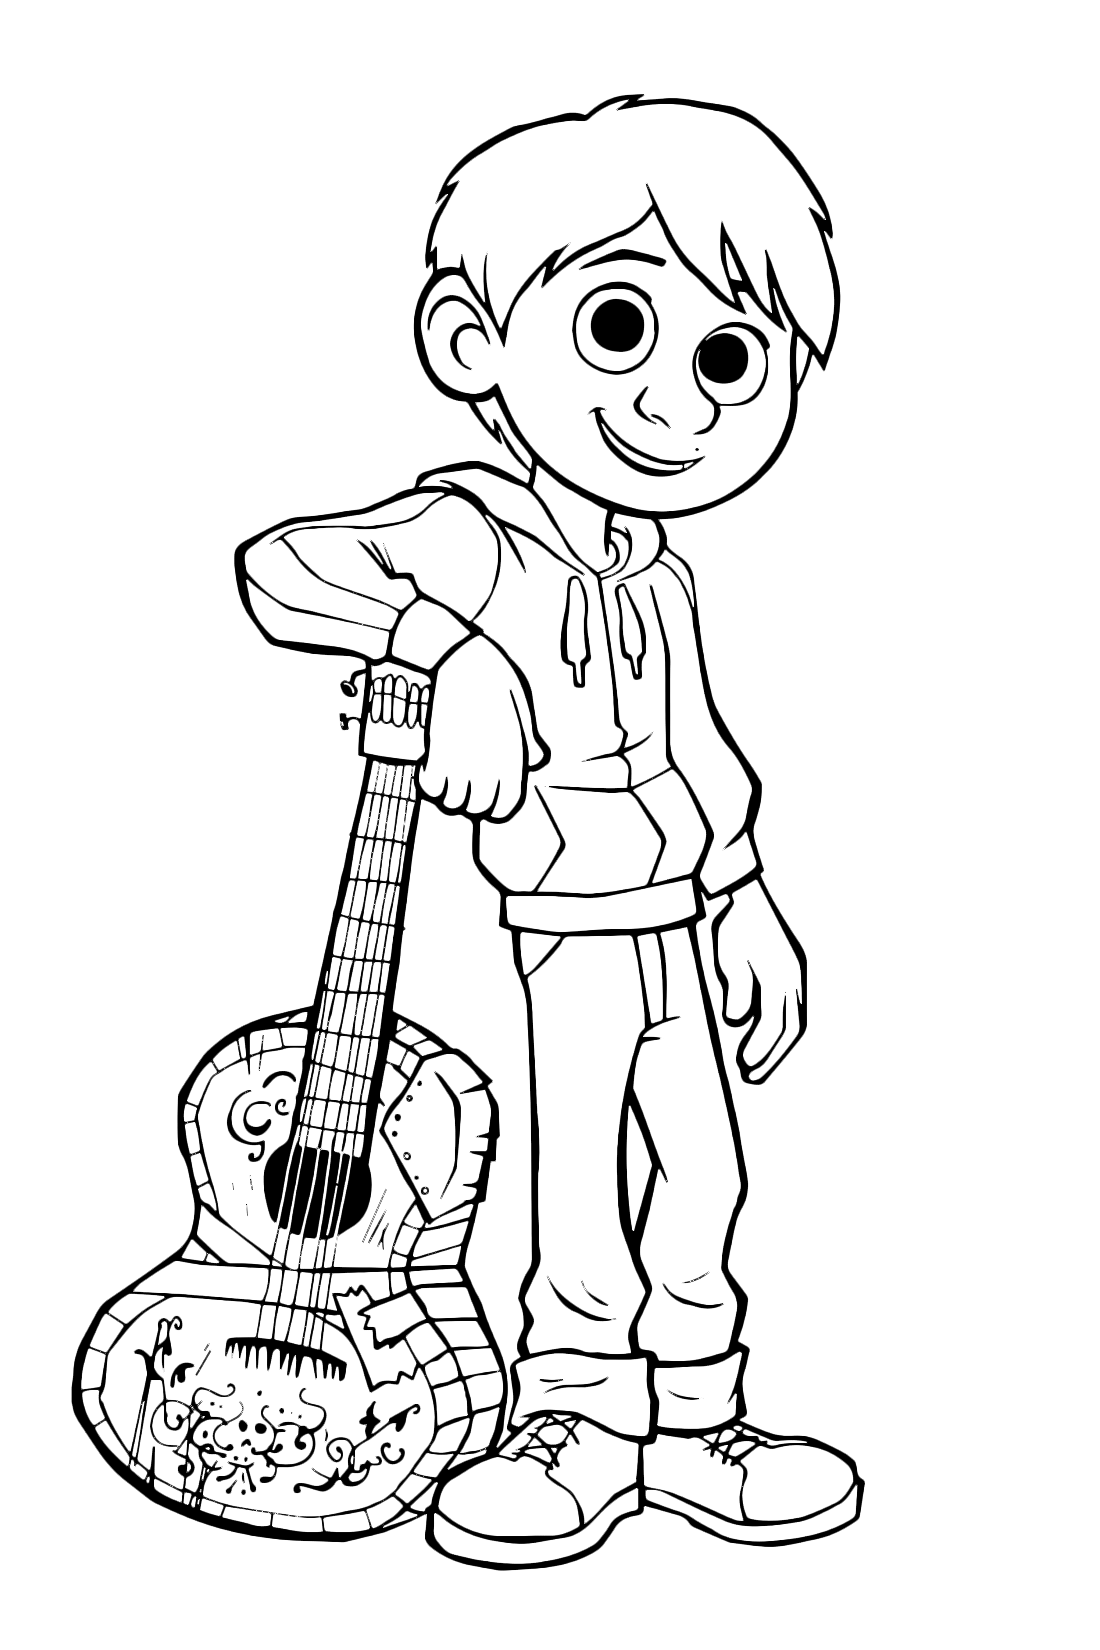 Miguel and his guitar, Coco, Pixel Art Scarf by ideth illustration